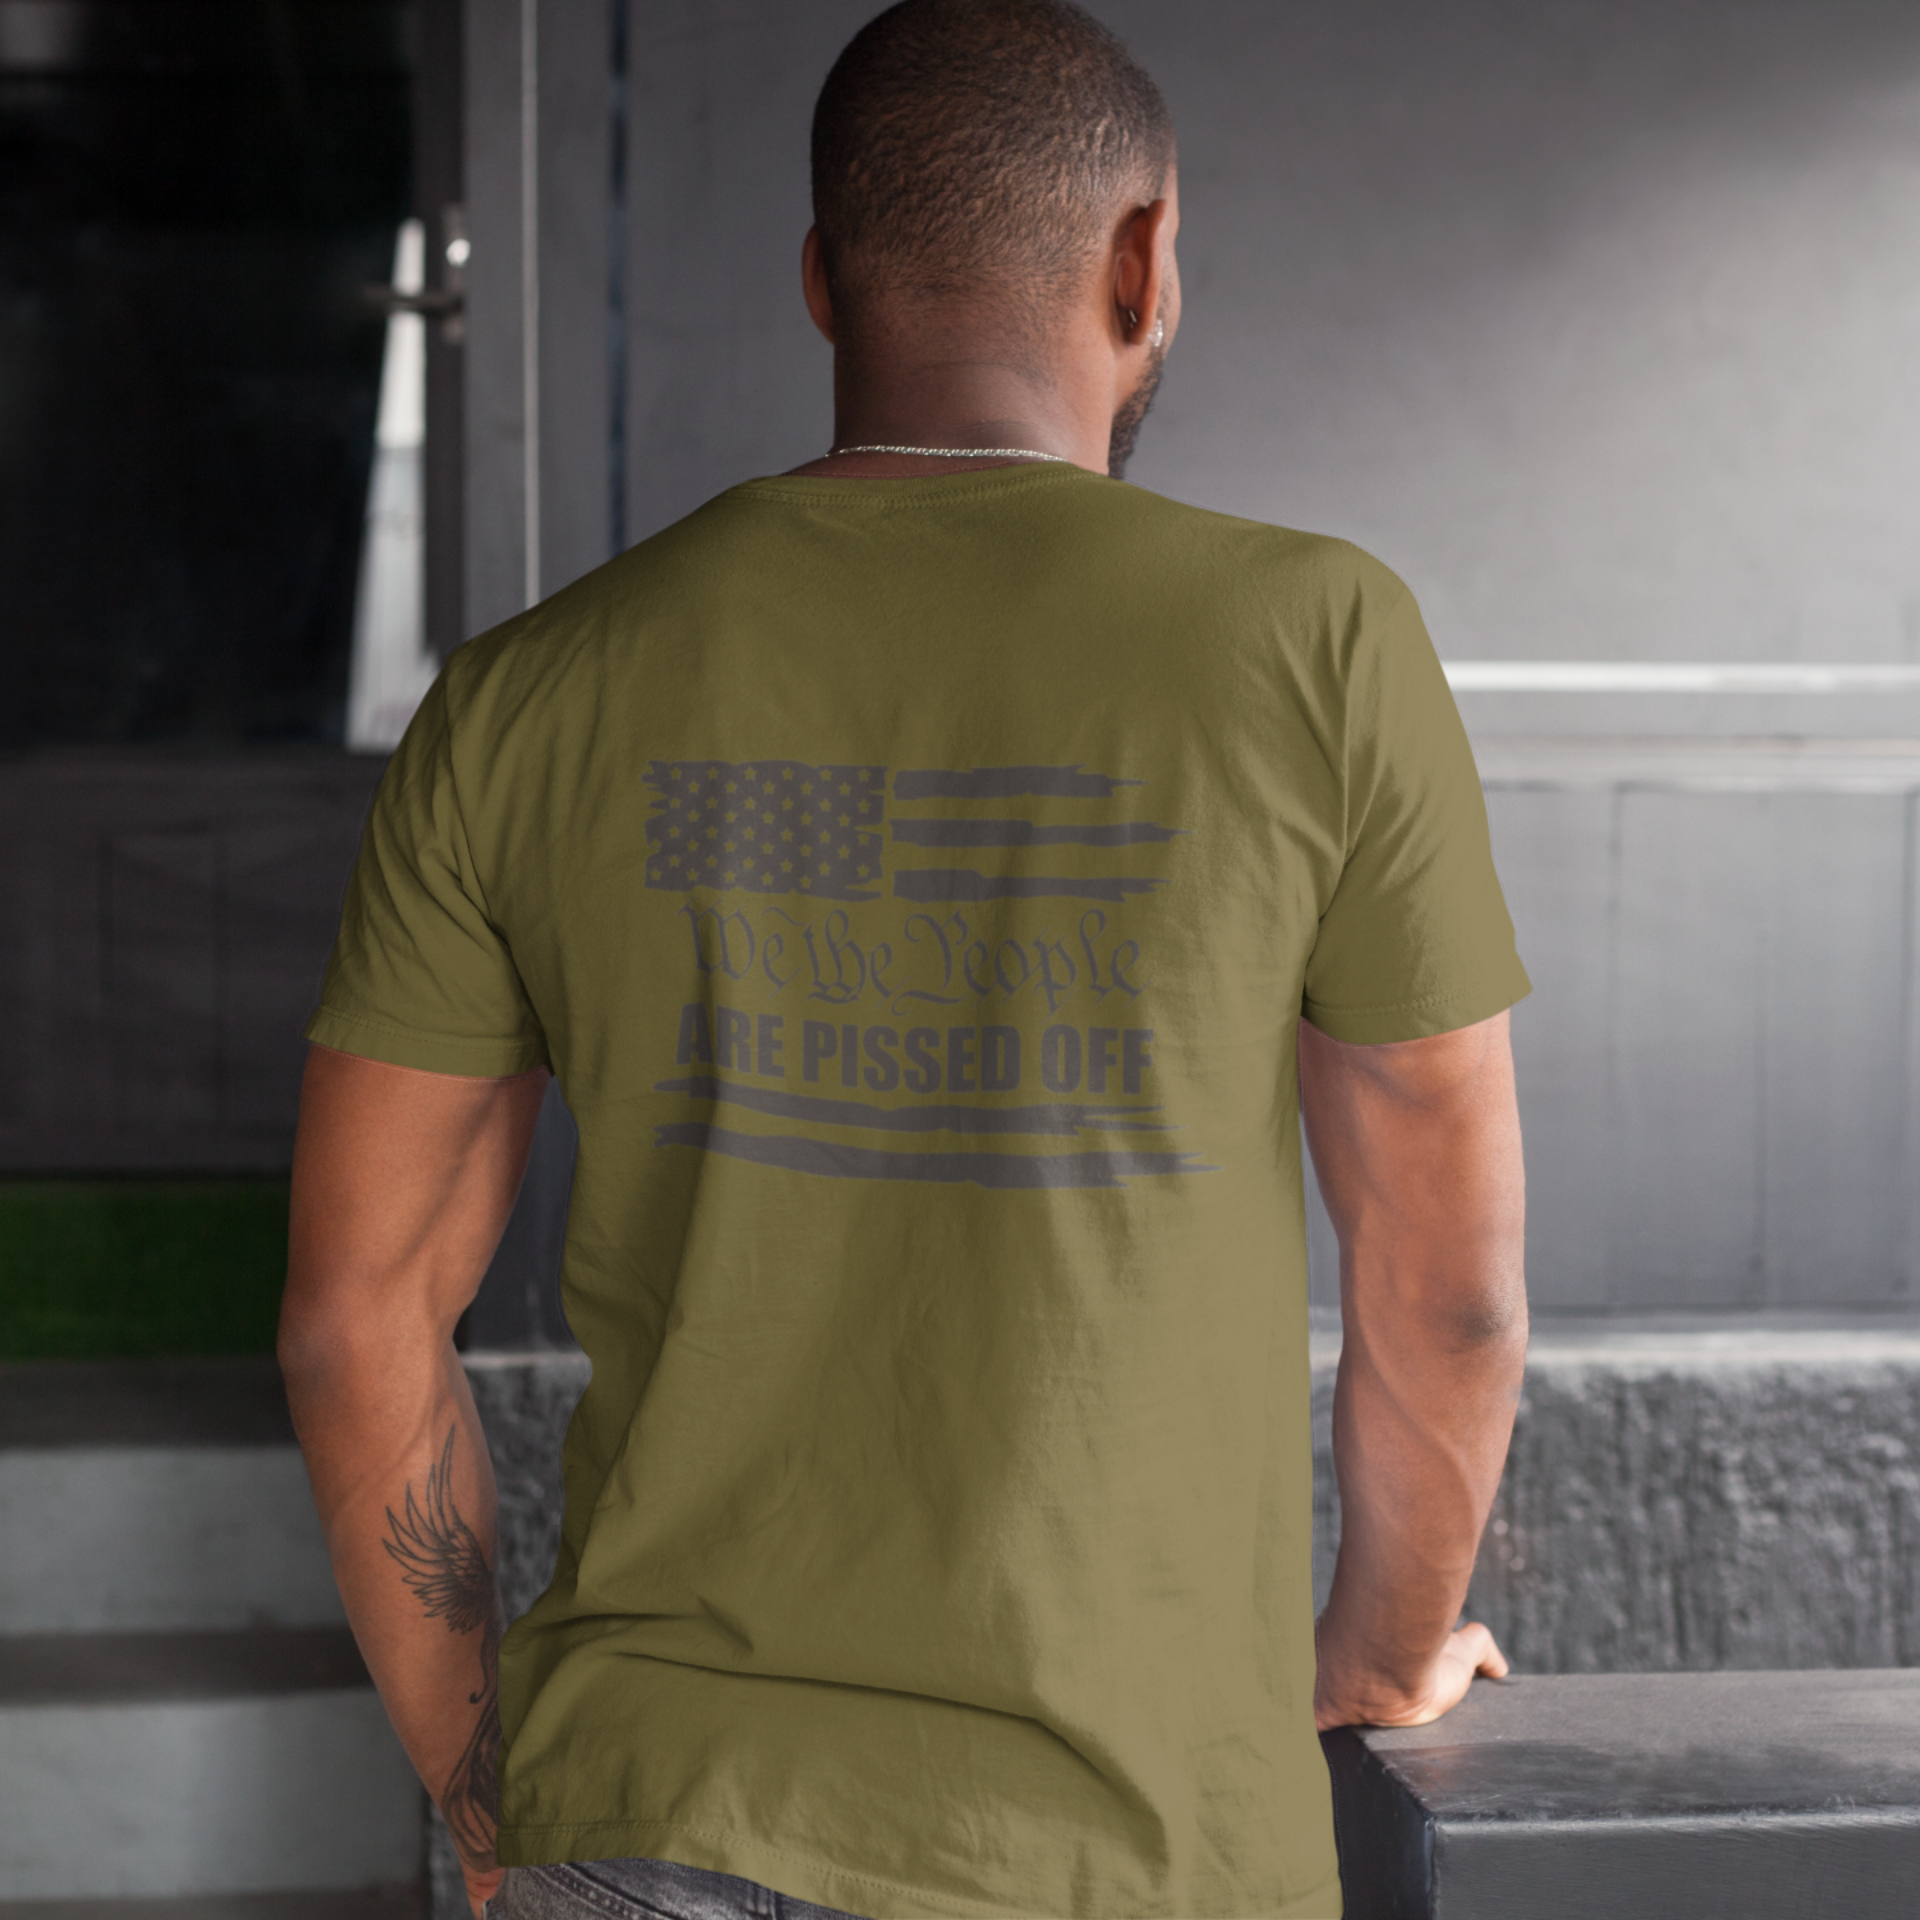 We The People Are Pissed Off Men's Short Sleeve 100% Cotton T-Shirt - inside horizontal back green